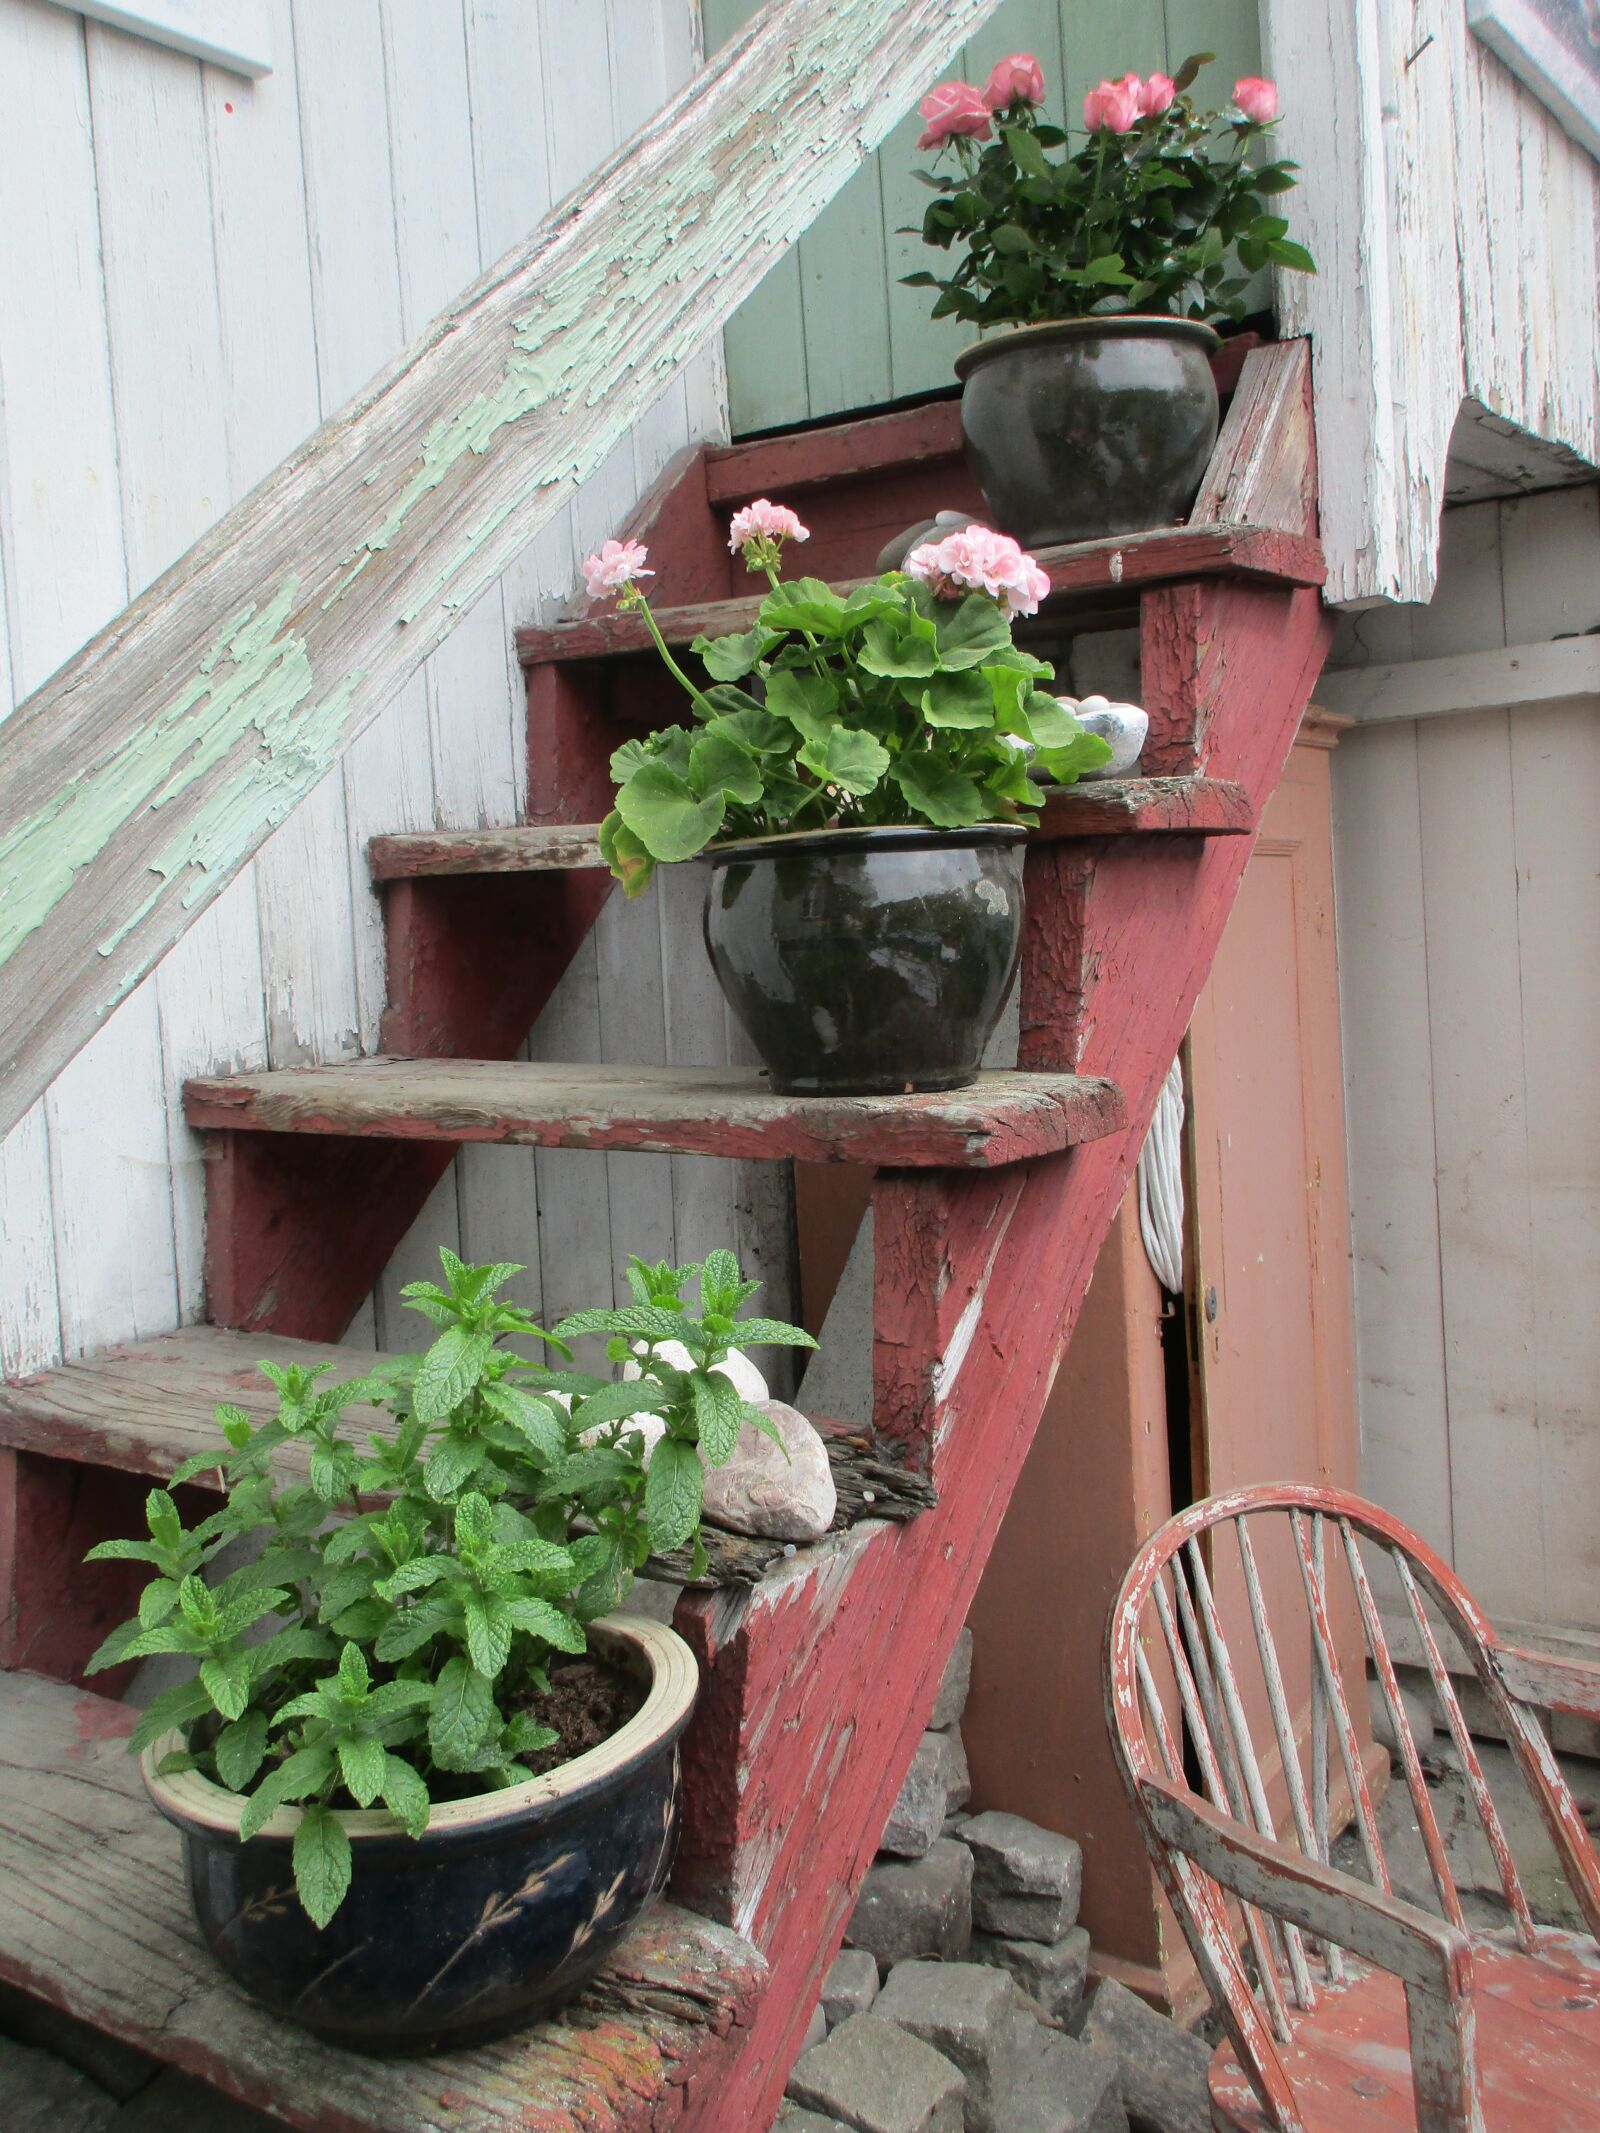 Canon PowerShot ELPH 170 IS (IXUS 170 / IXY 170) sample photo. Flowers, stairs, summer photography